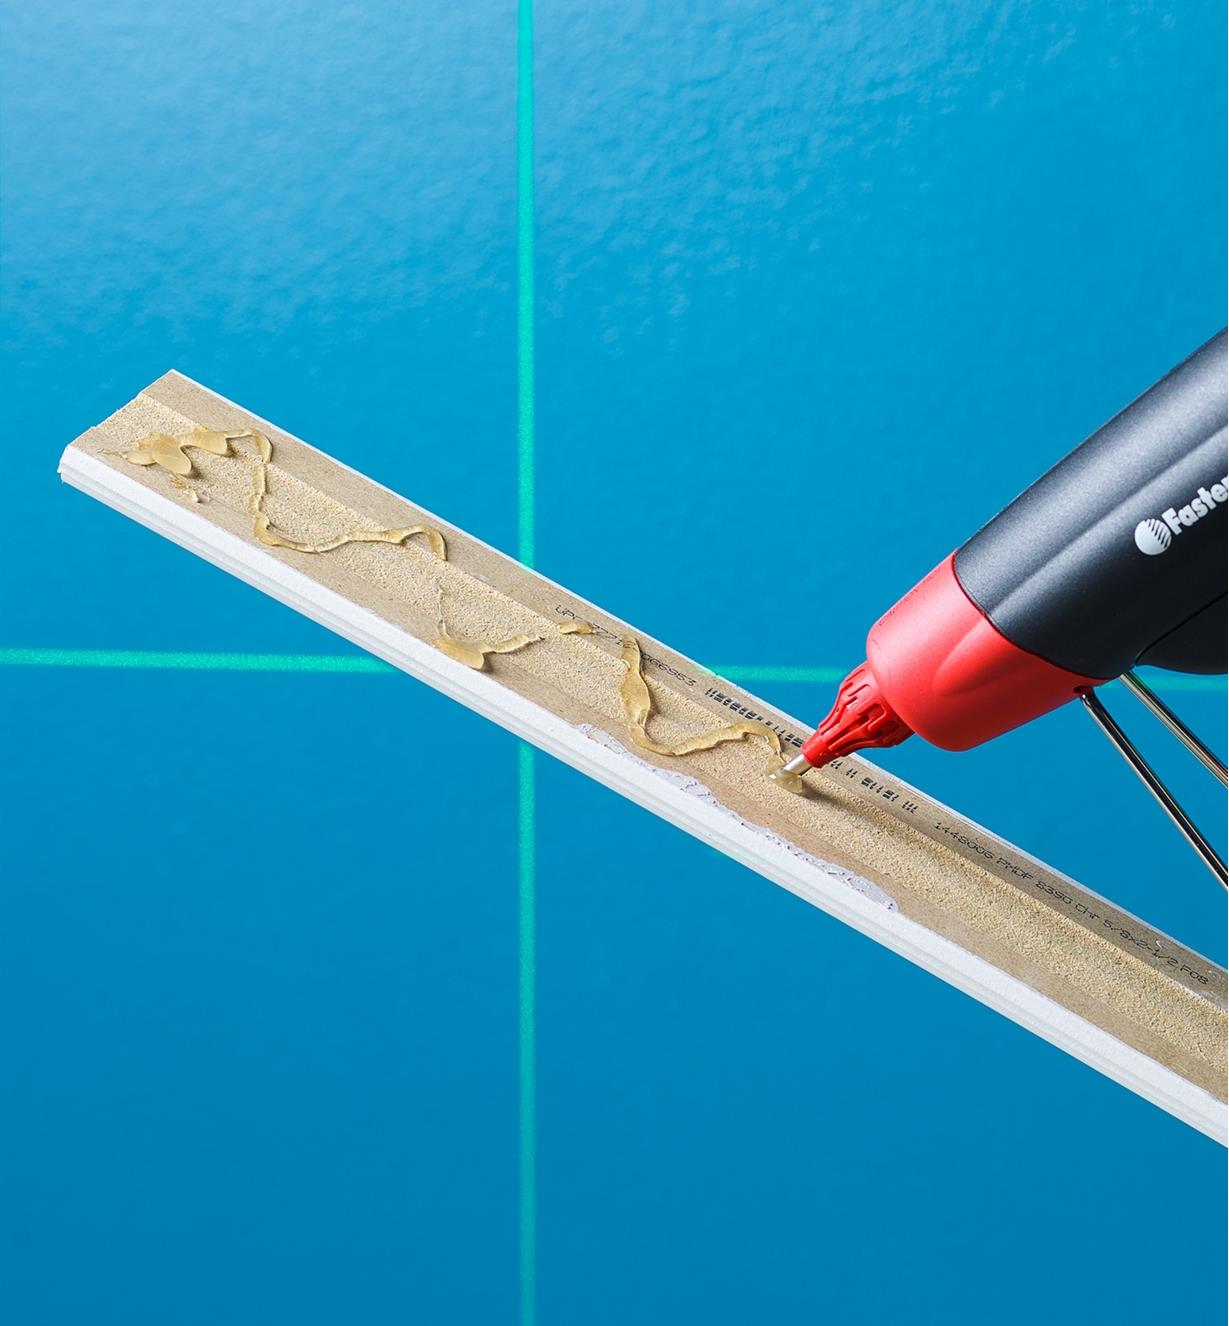 Installing a piece of trim molding, using a FastenMaster pro hot-melt gun to glue it in place